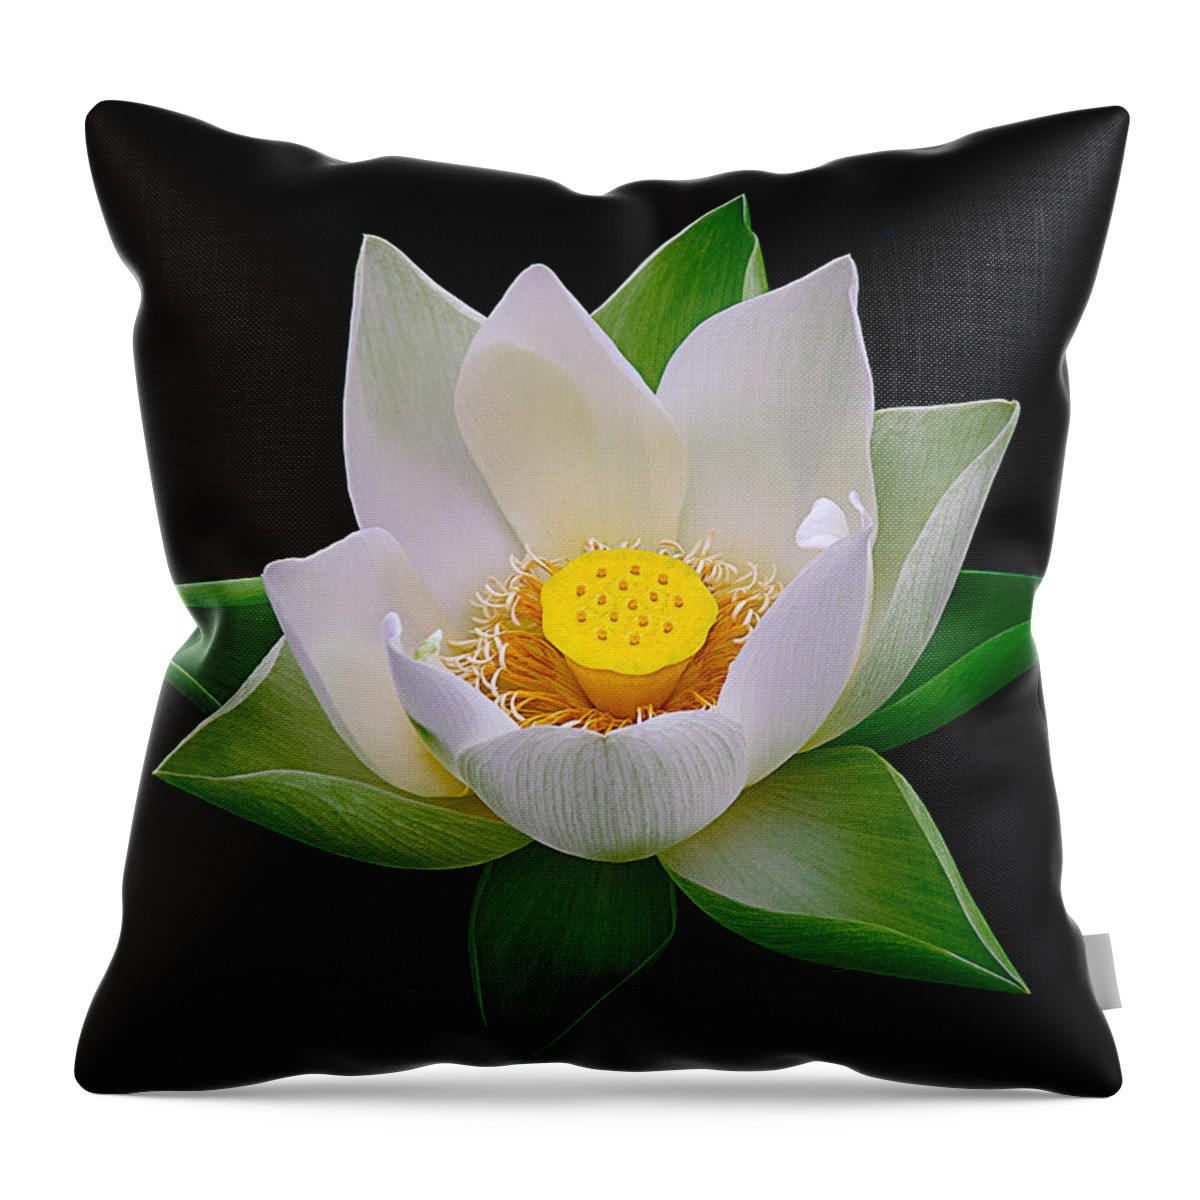 Lotus Throw Pillow featuring the photograph Lotus Blooming by Julie Palencia